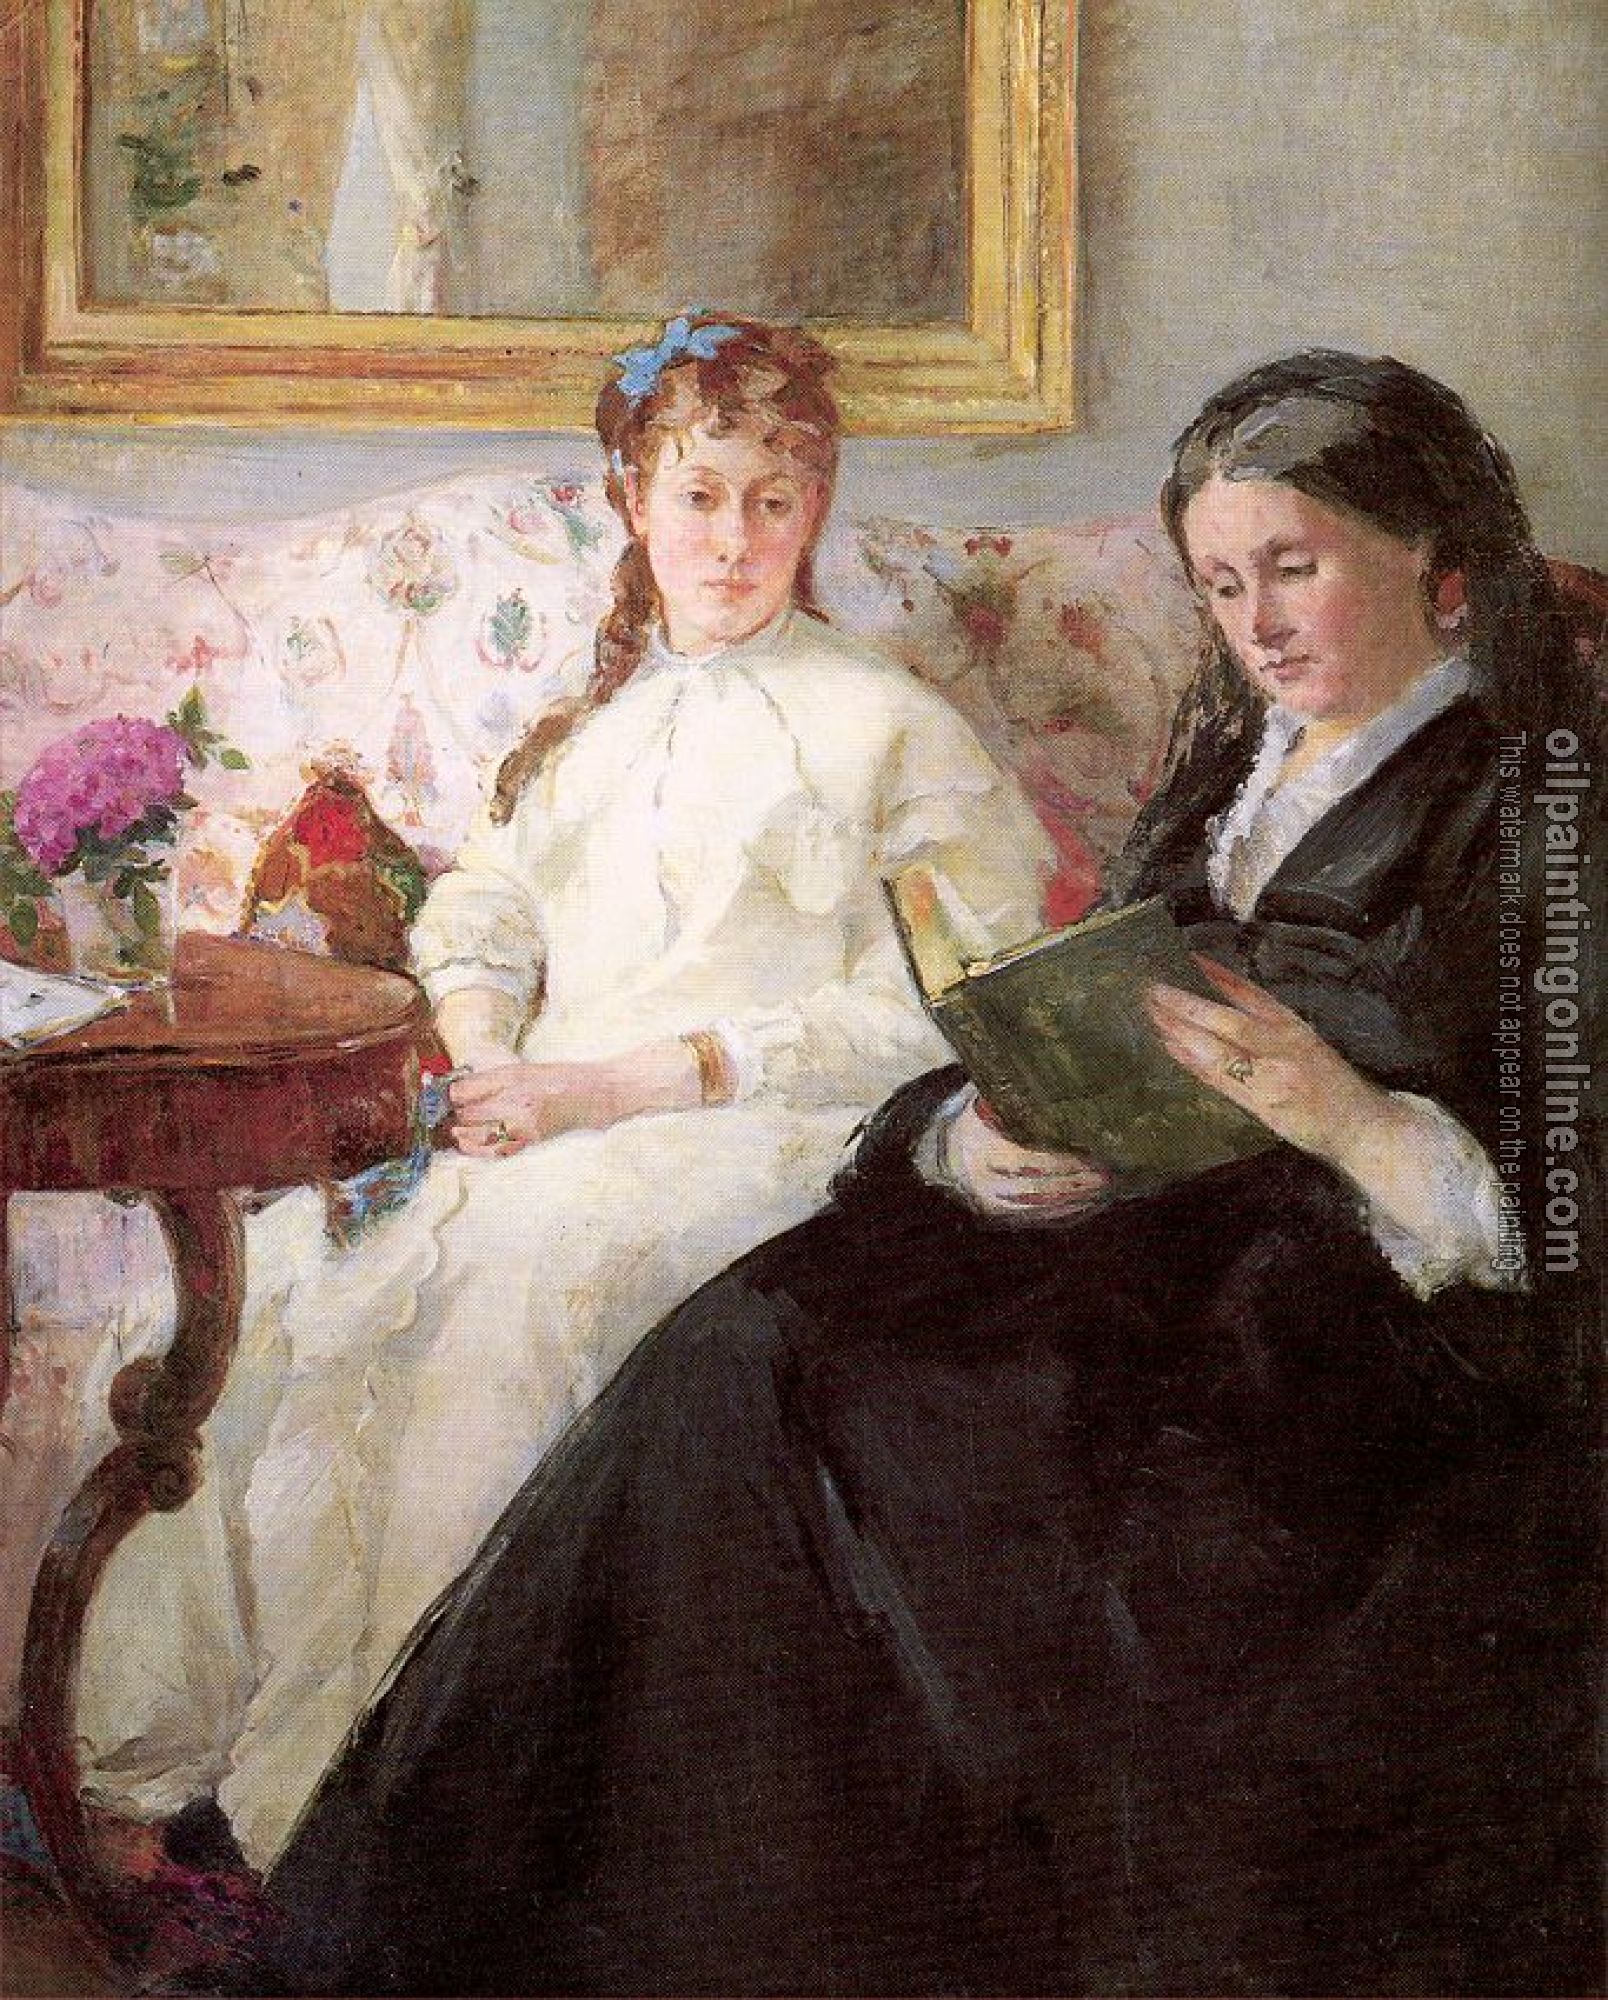 Morisot, Berthe - The Mother and Sister of the Artist